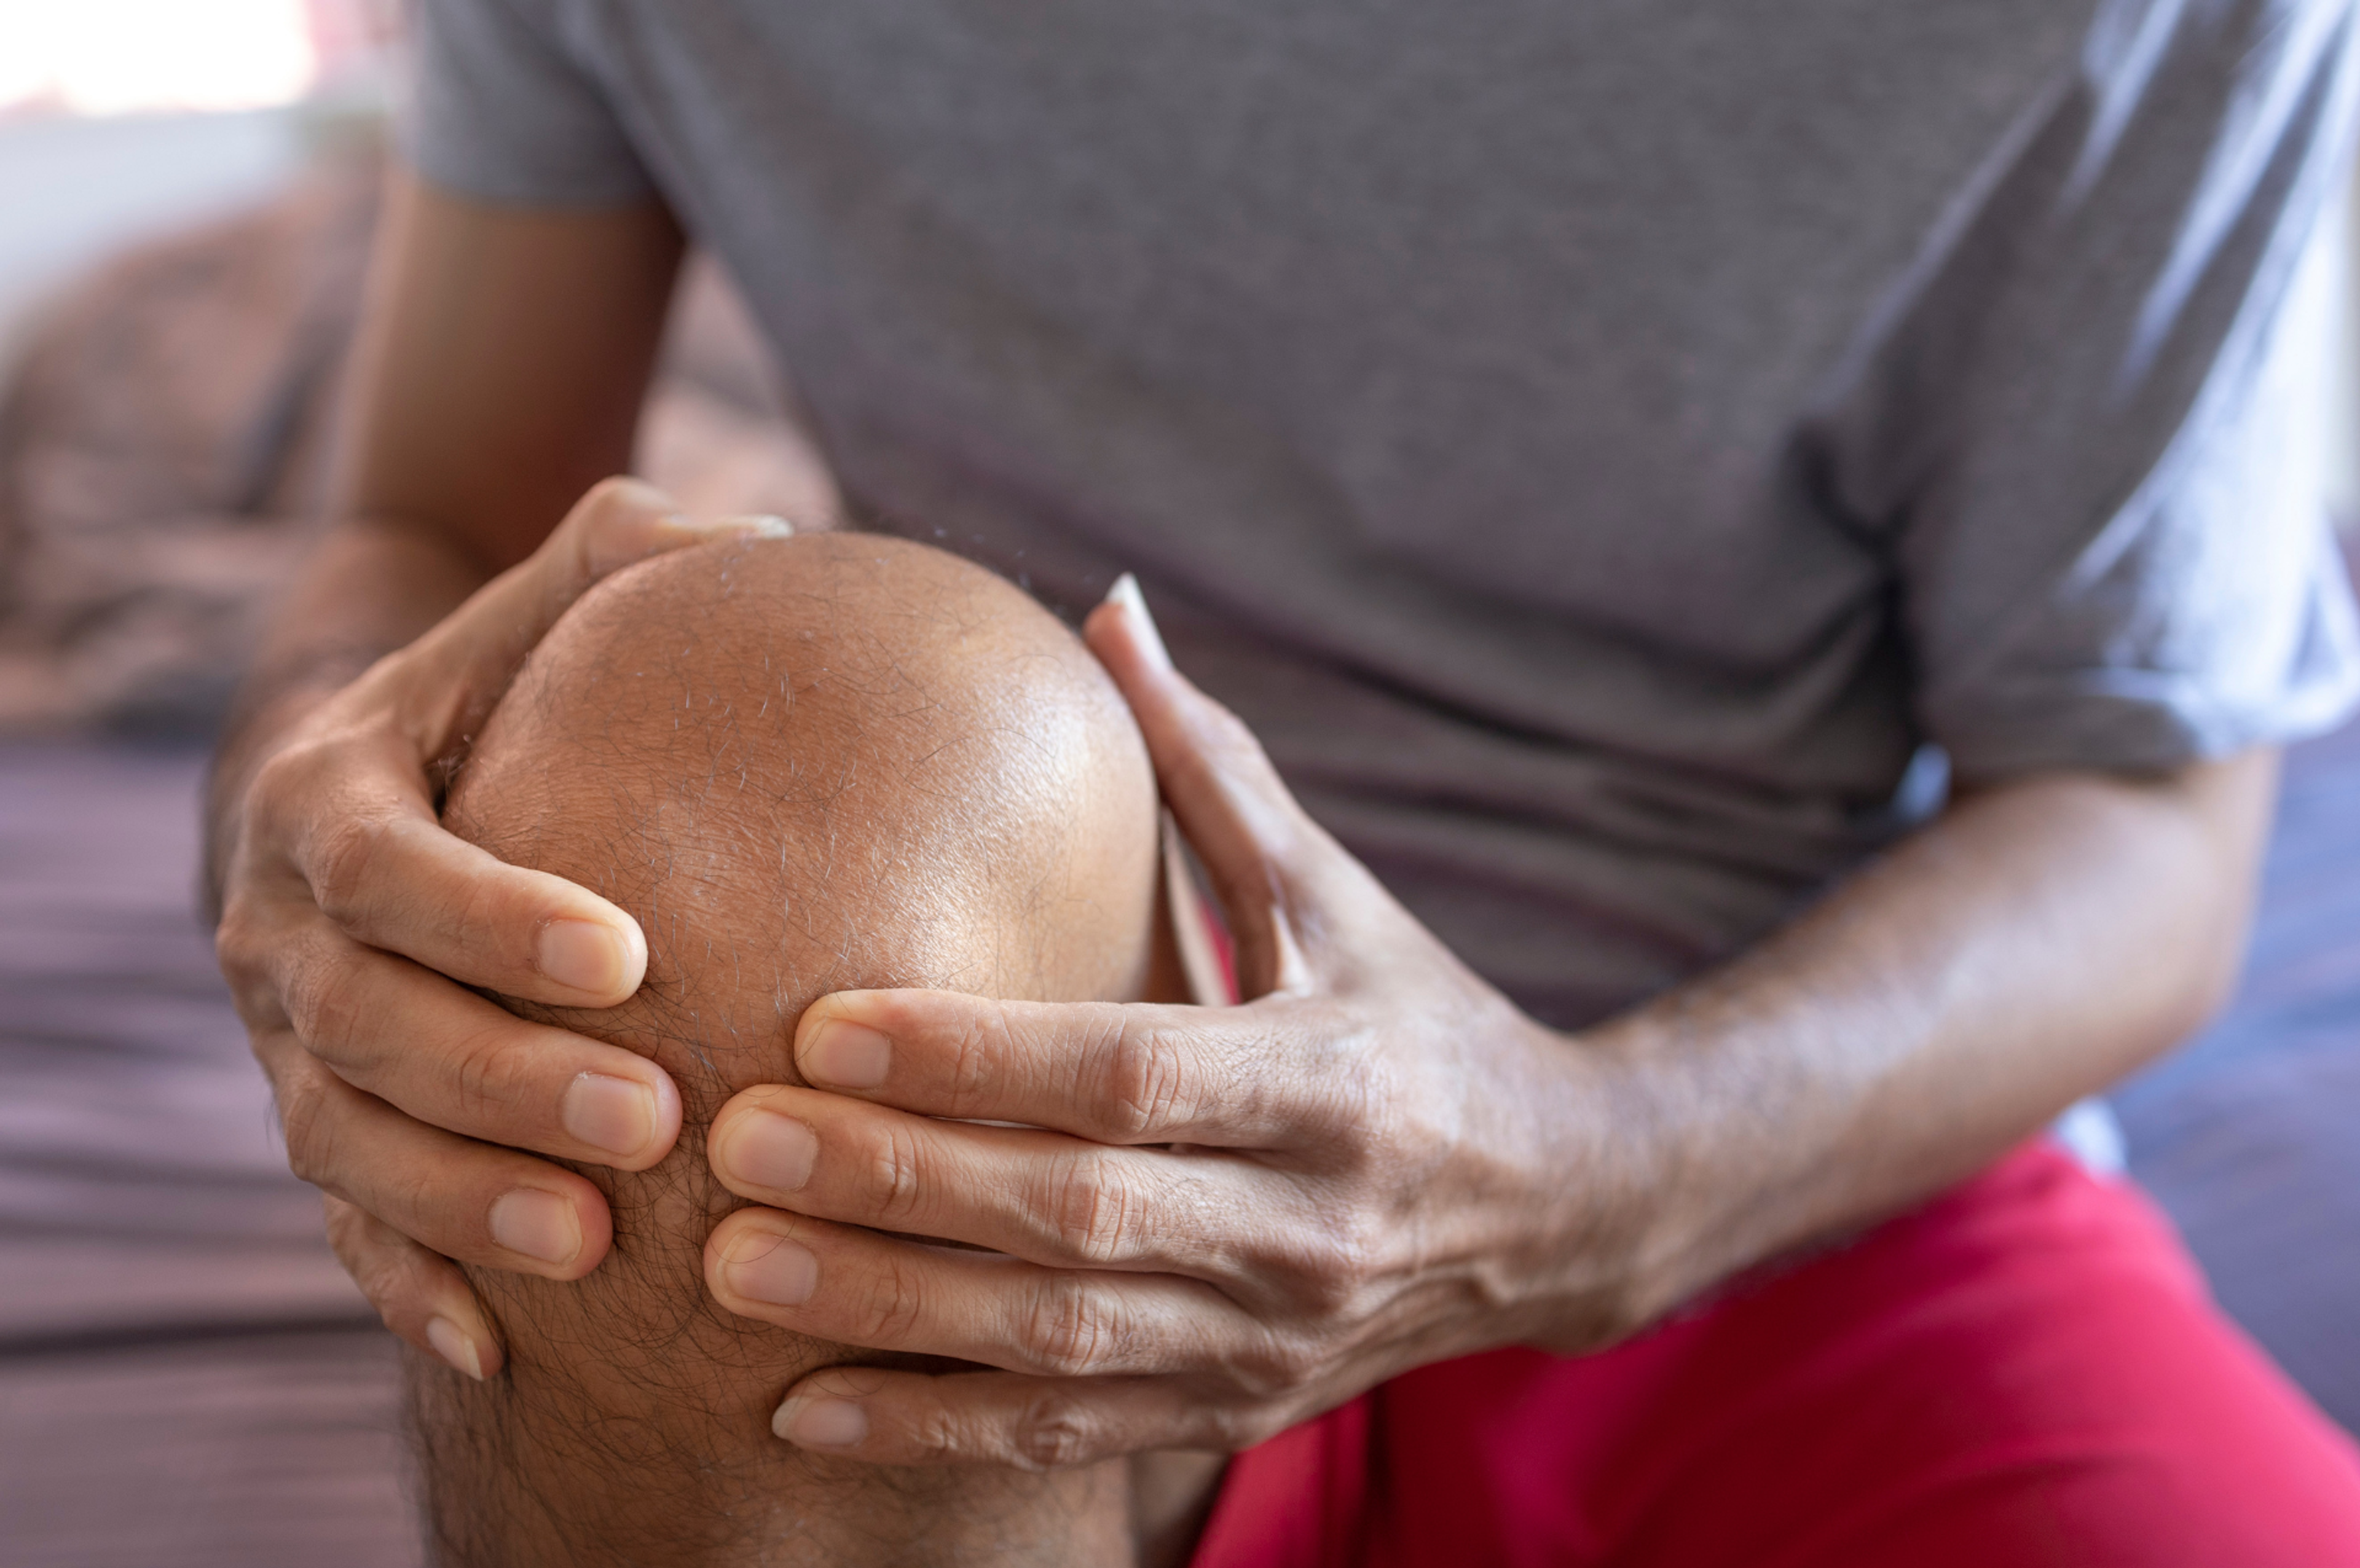 You can shorten your recovery time for patellofemoral pain syndrome by treating it promptly.